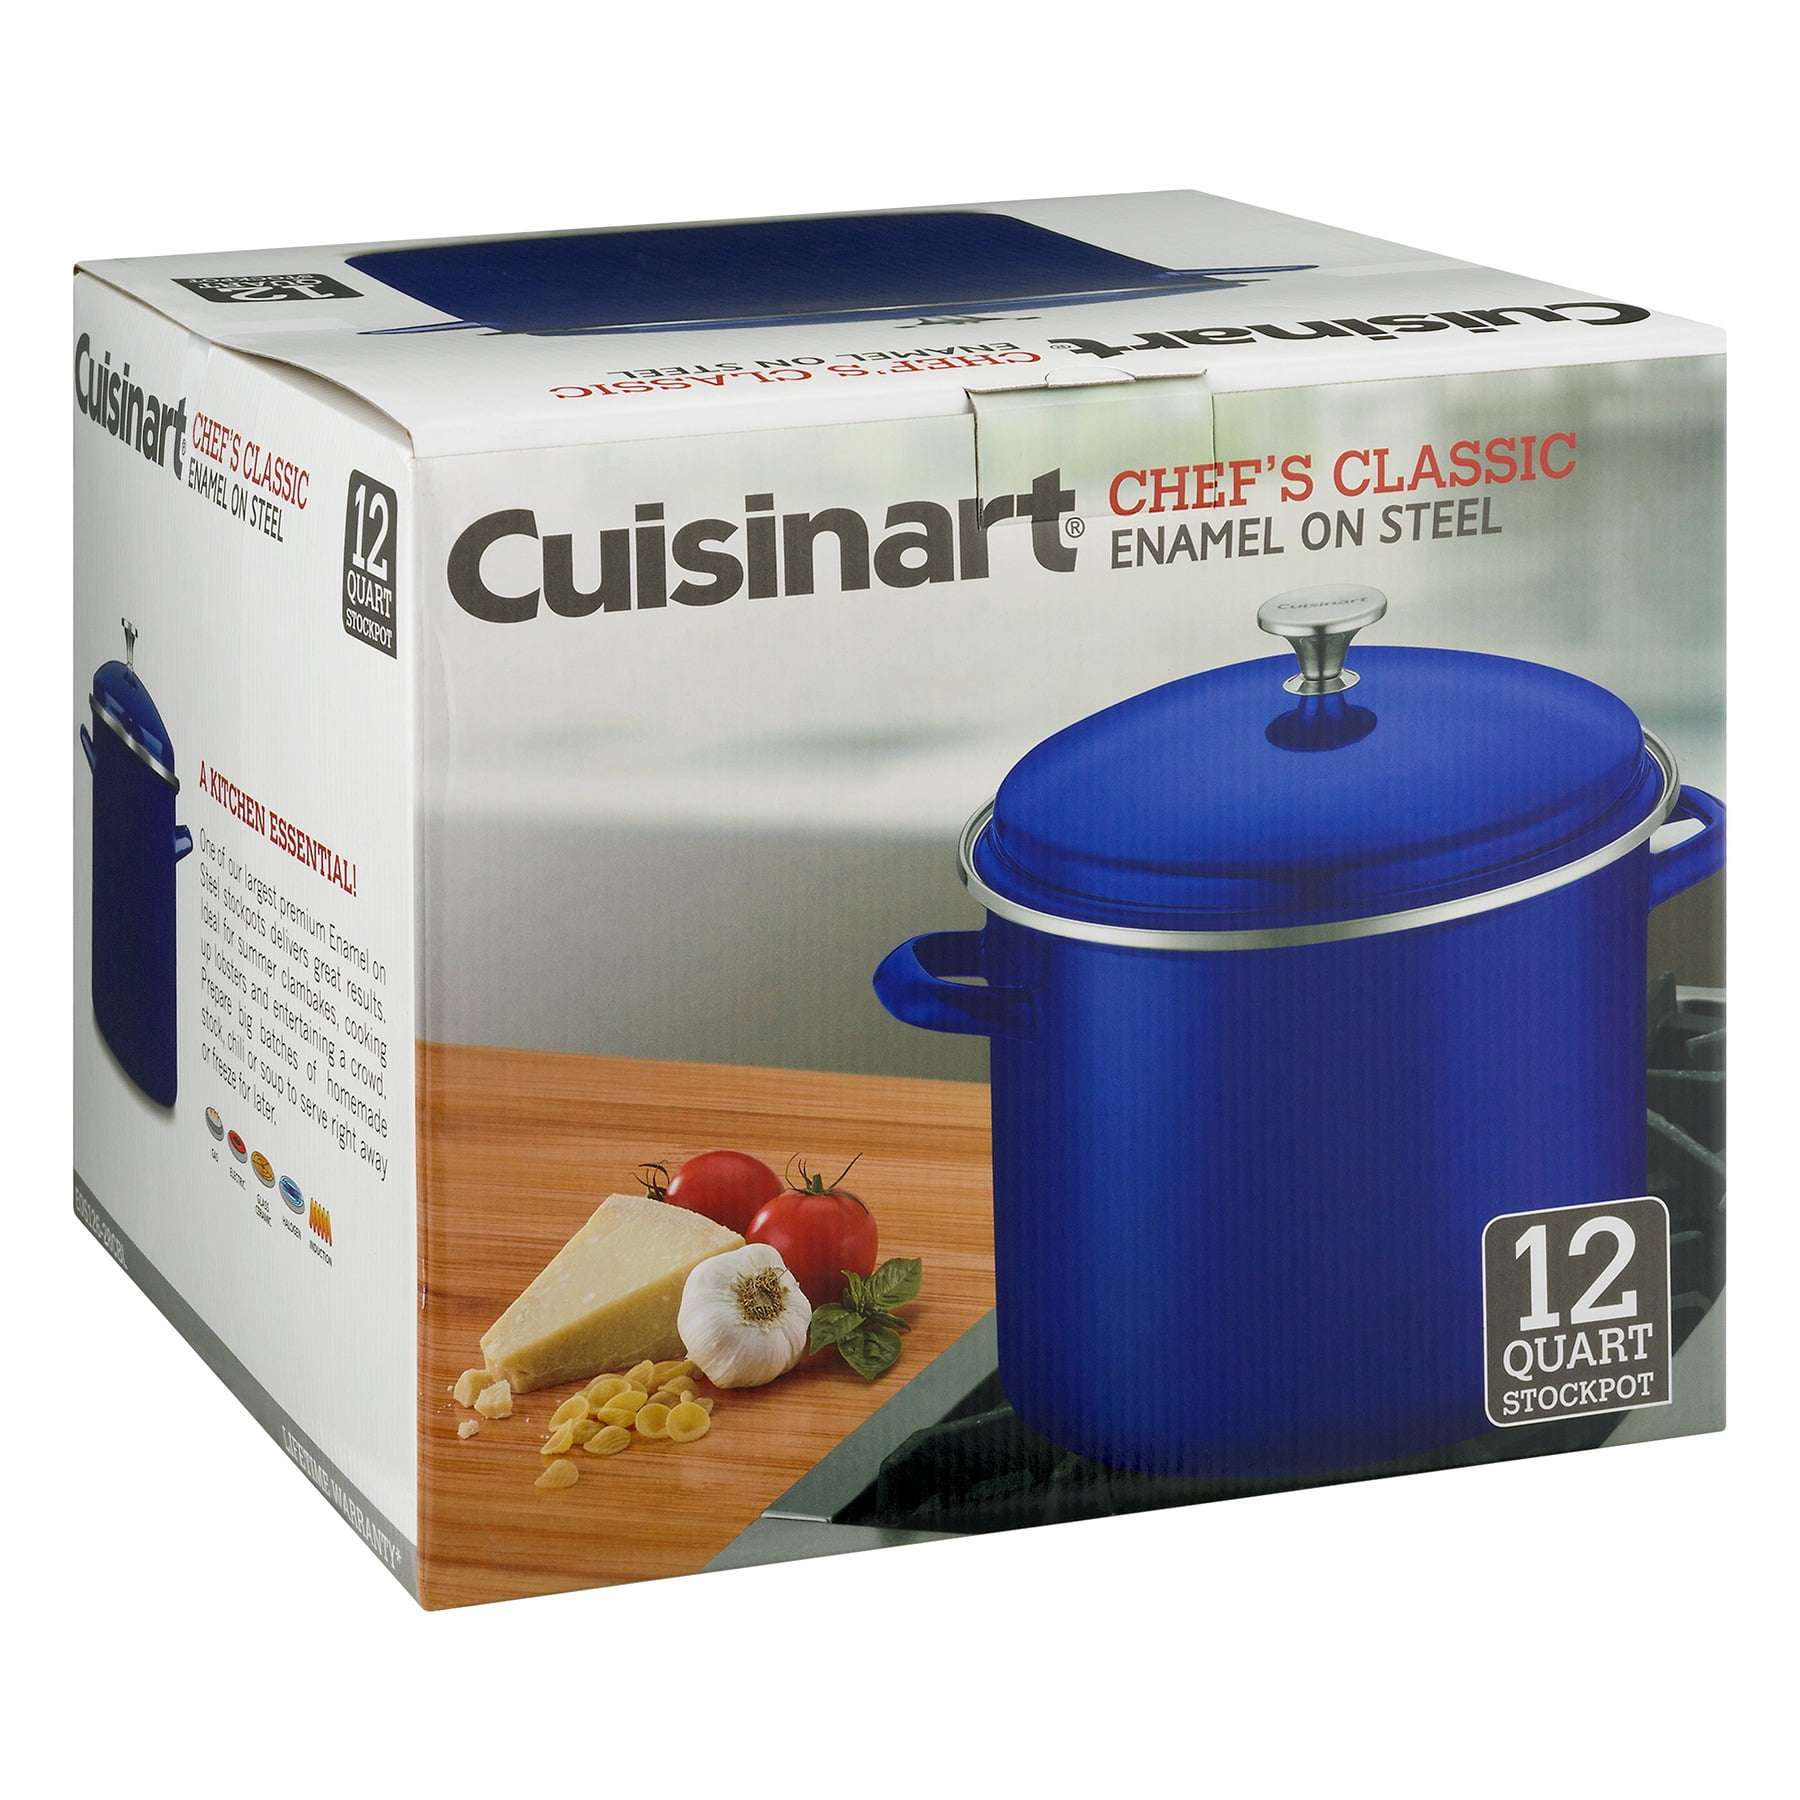 Chef Classic Enamel on Steel Cookware 12 Quart Stockpot with Cover 